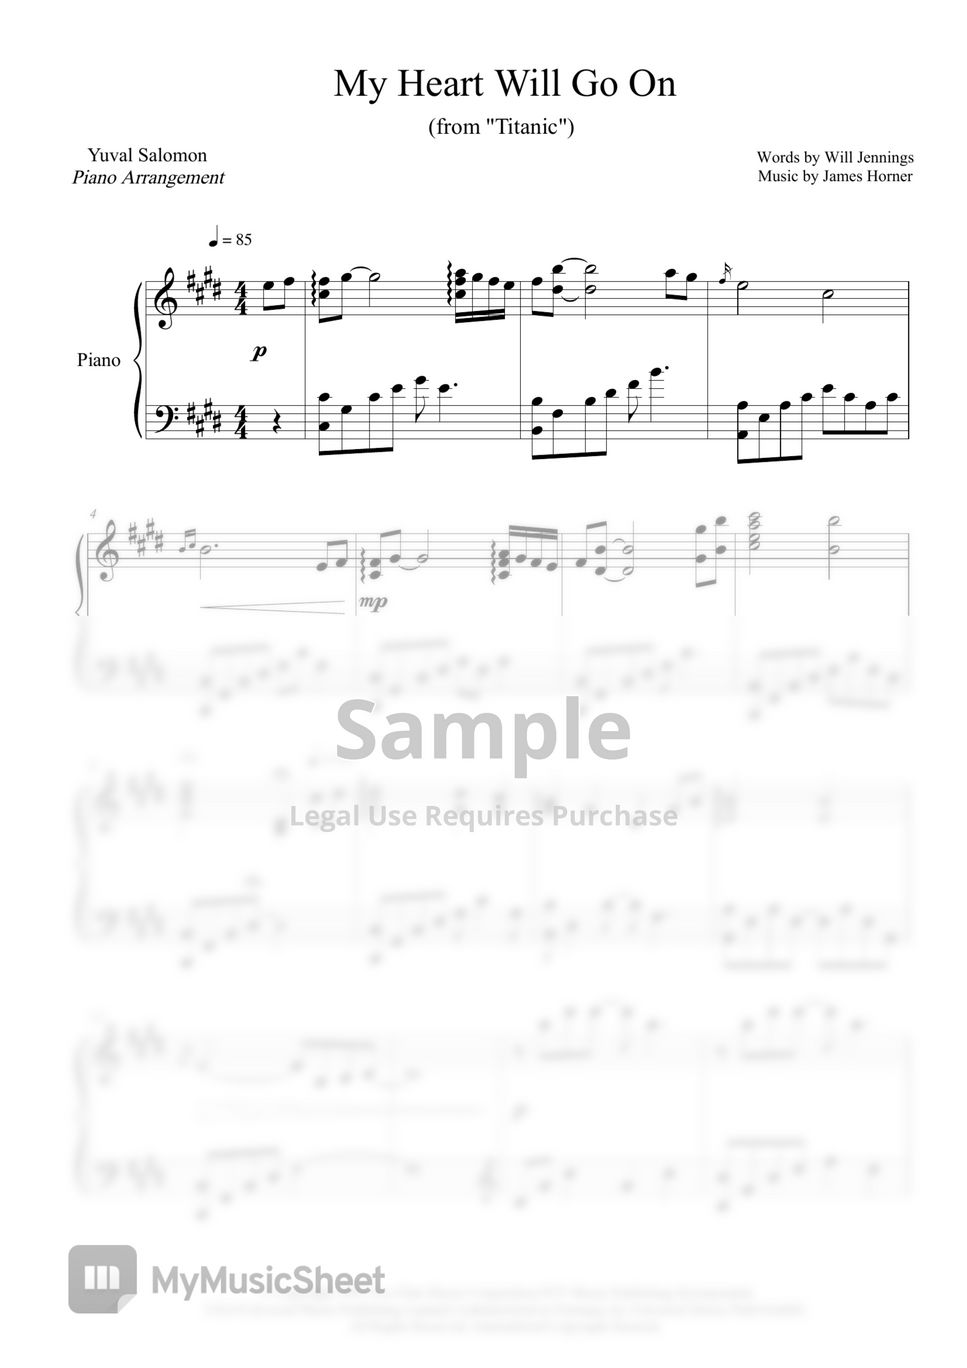 All Music Sheets - (Special Package 30% Discount) by Yuval Salomon